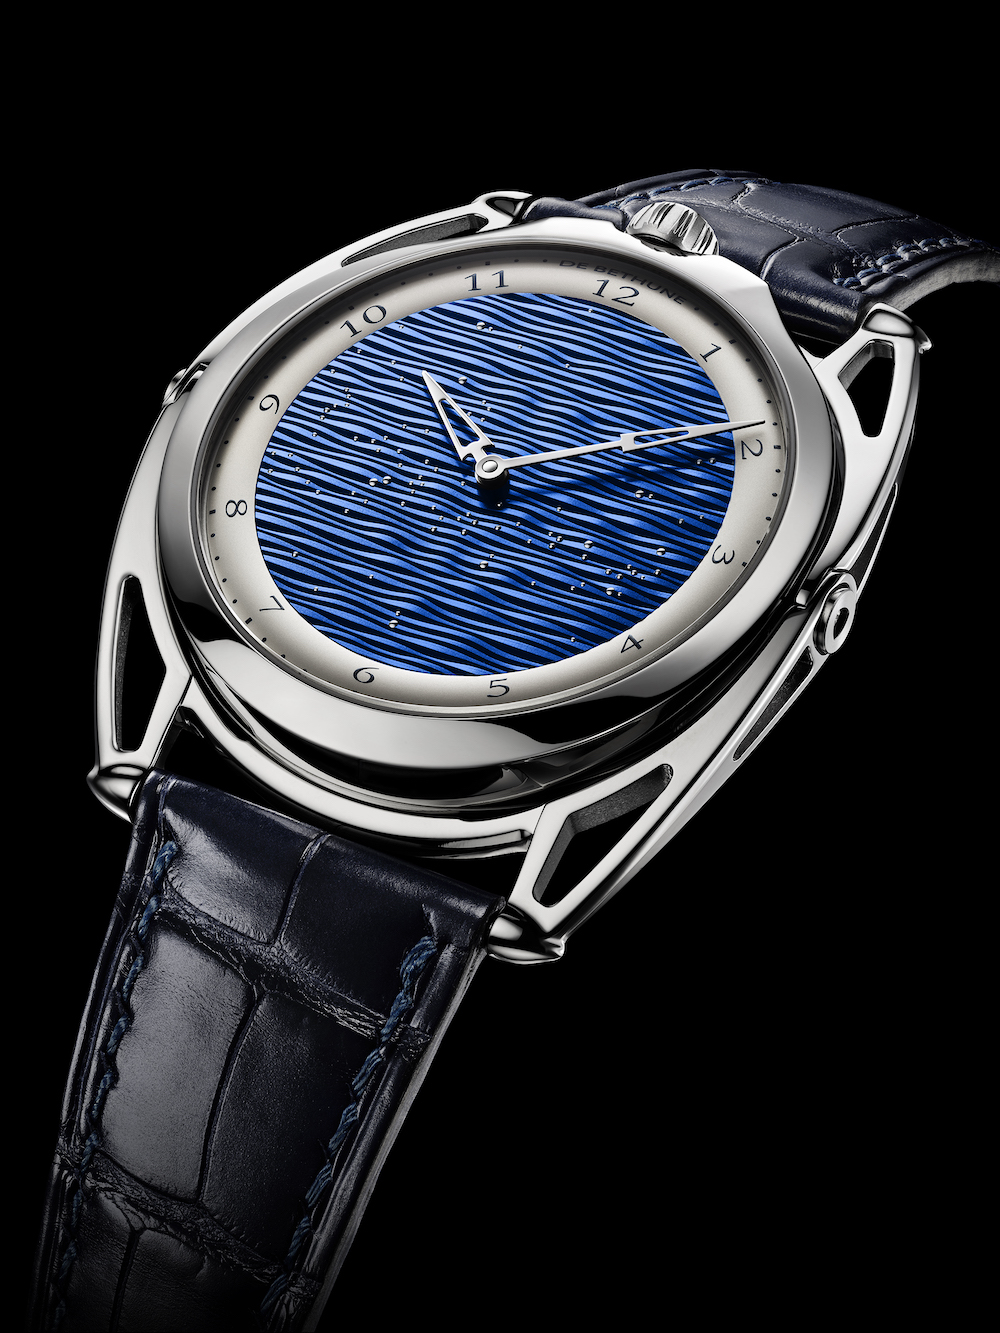 Waves and Stars: De Bethune Launches DB28xs Starry Seas